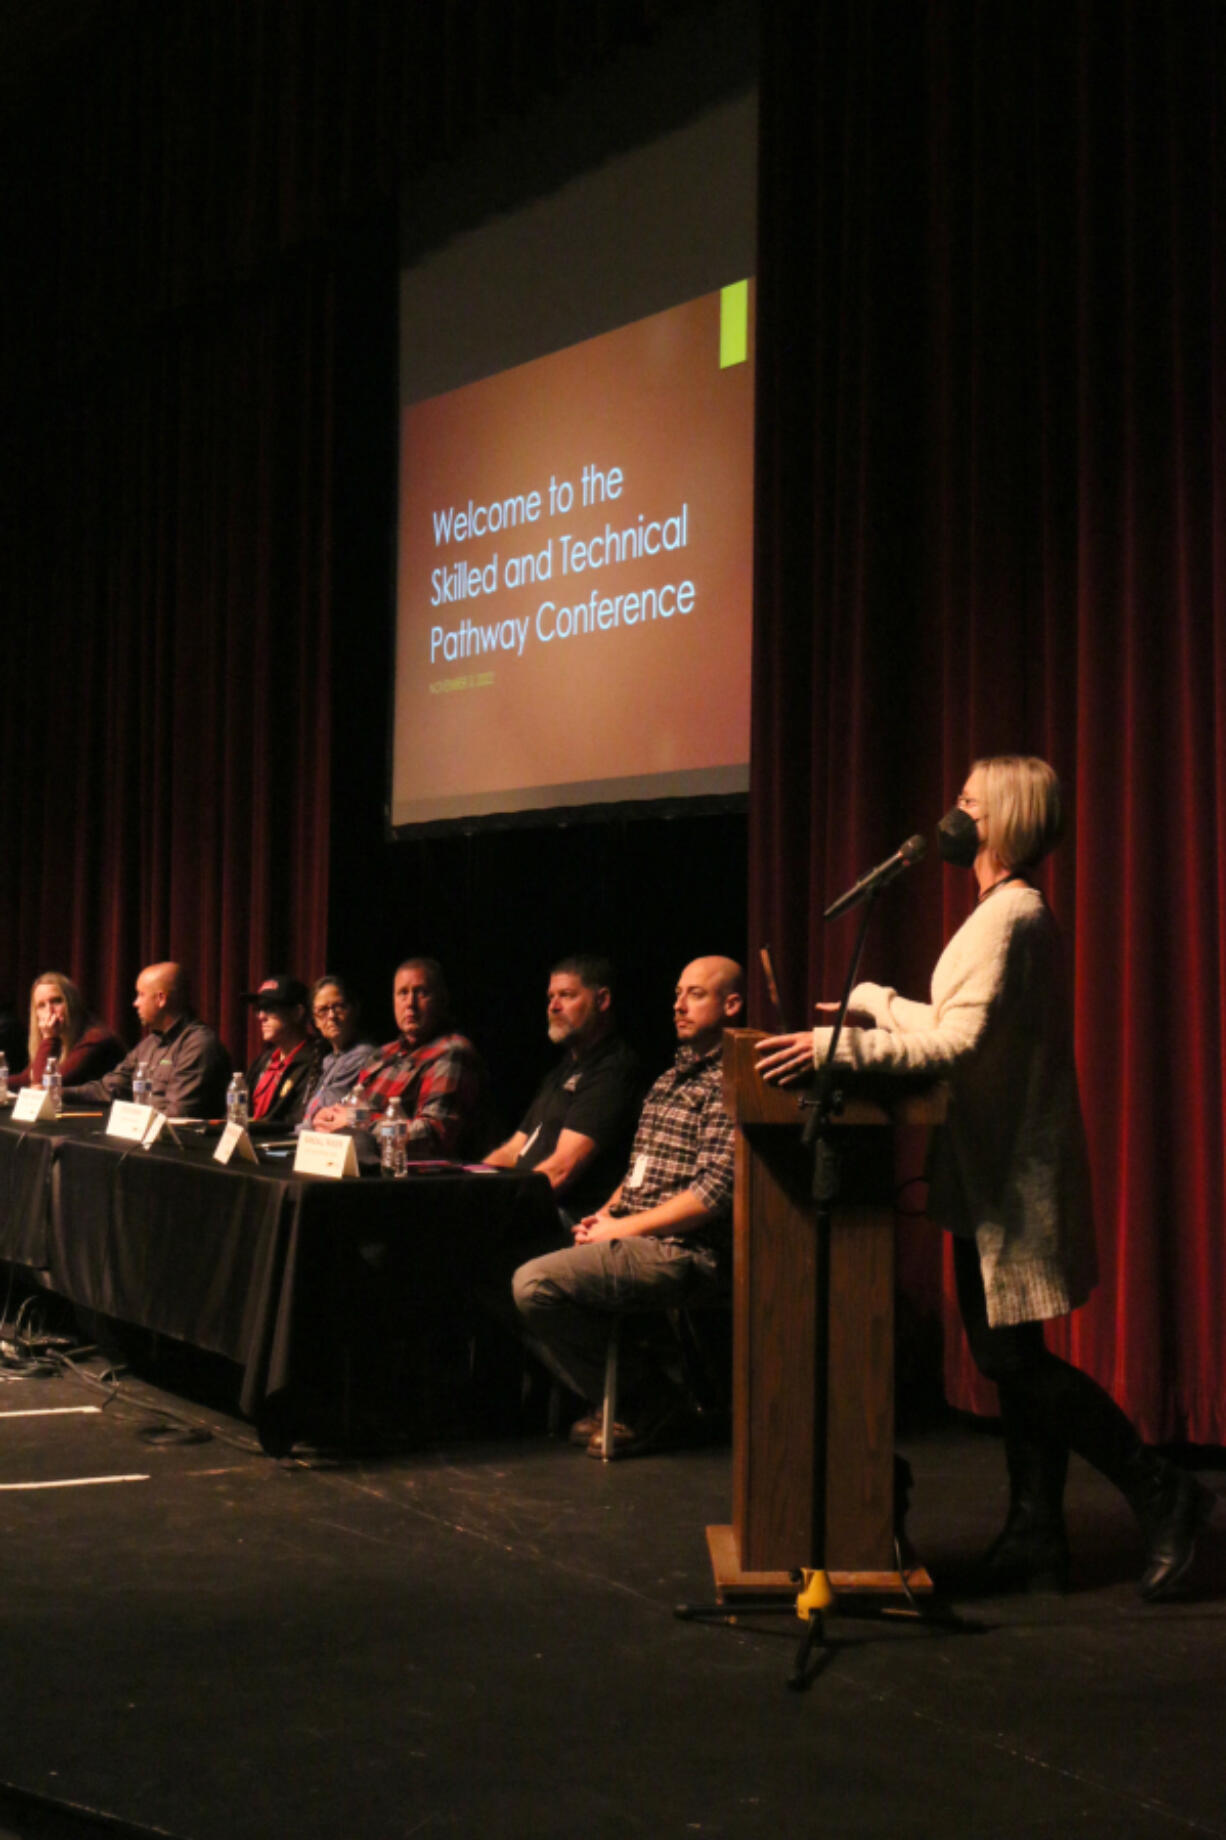 On Nov. 3, students enrolled in the Career & Technical Education program at Washougal High School gained valuable insight into the work world at the annual Pathway Conference.